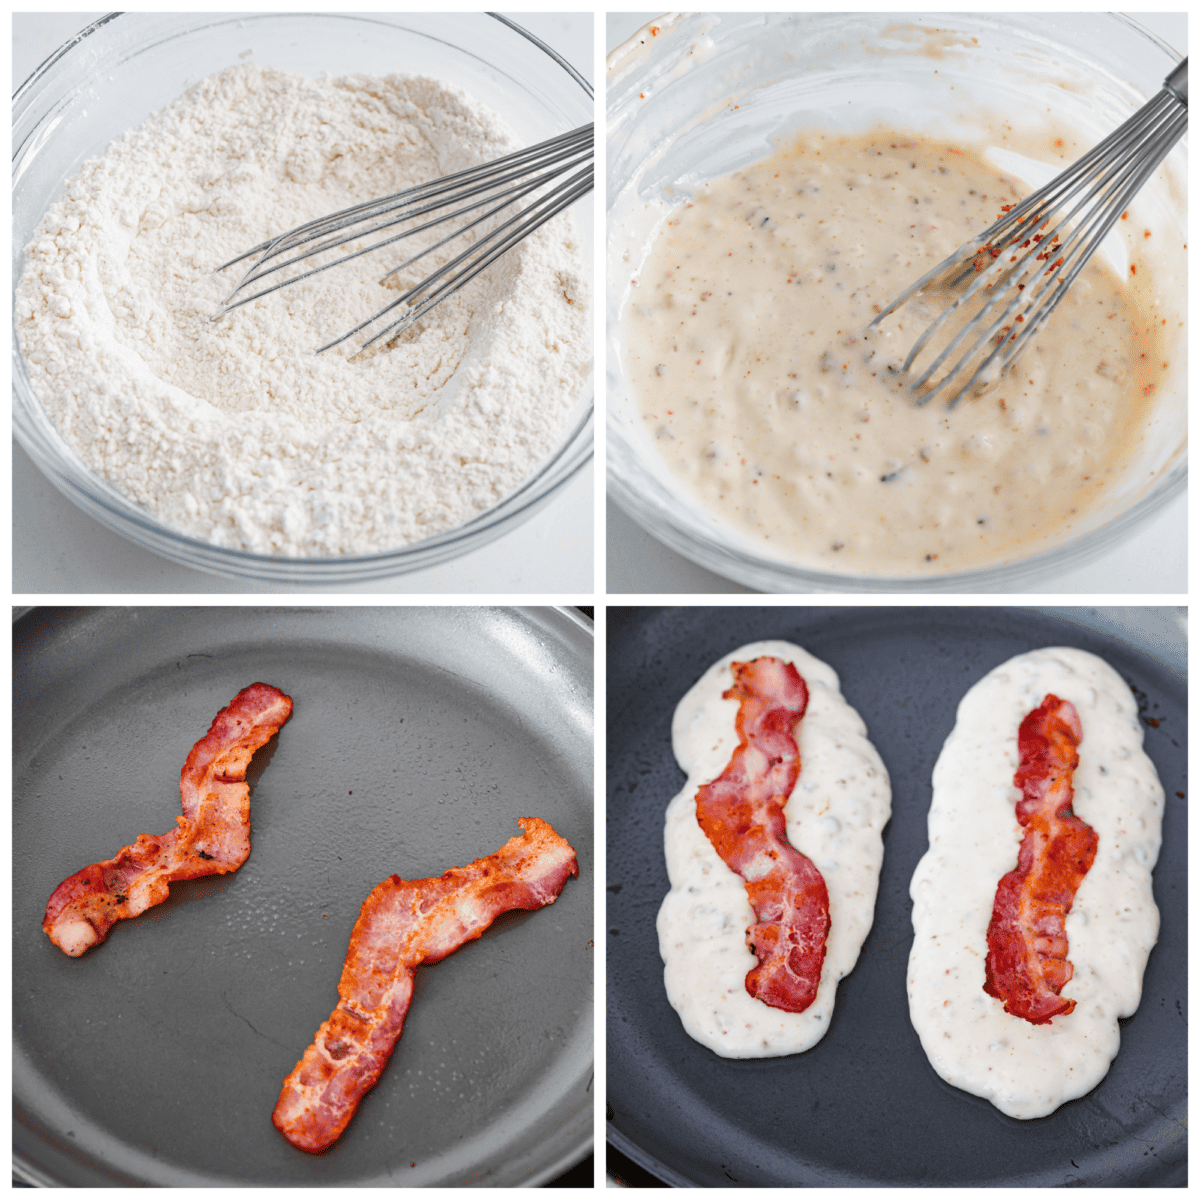 4-photo collage of the batter being mixed up and cooked on a pan with the bacon.